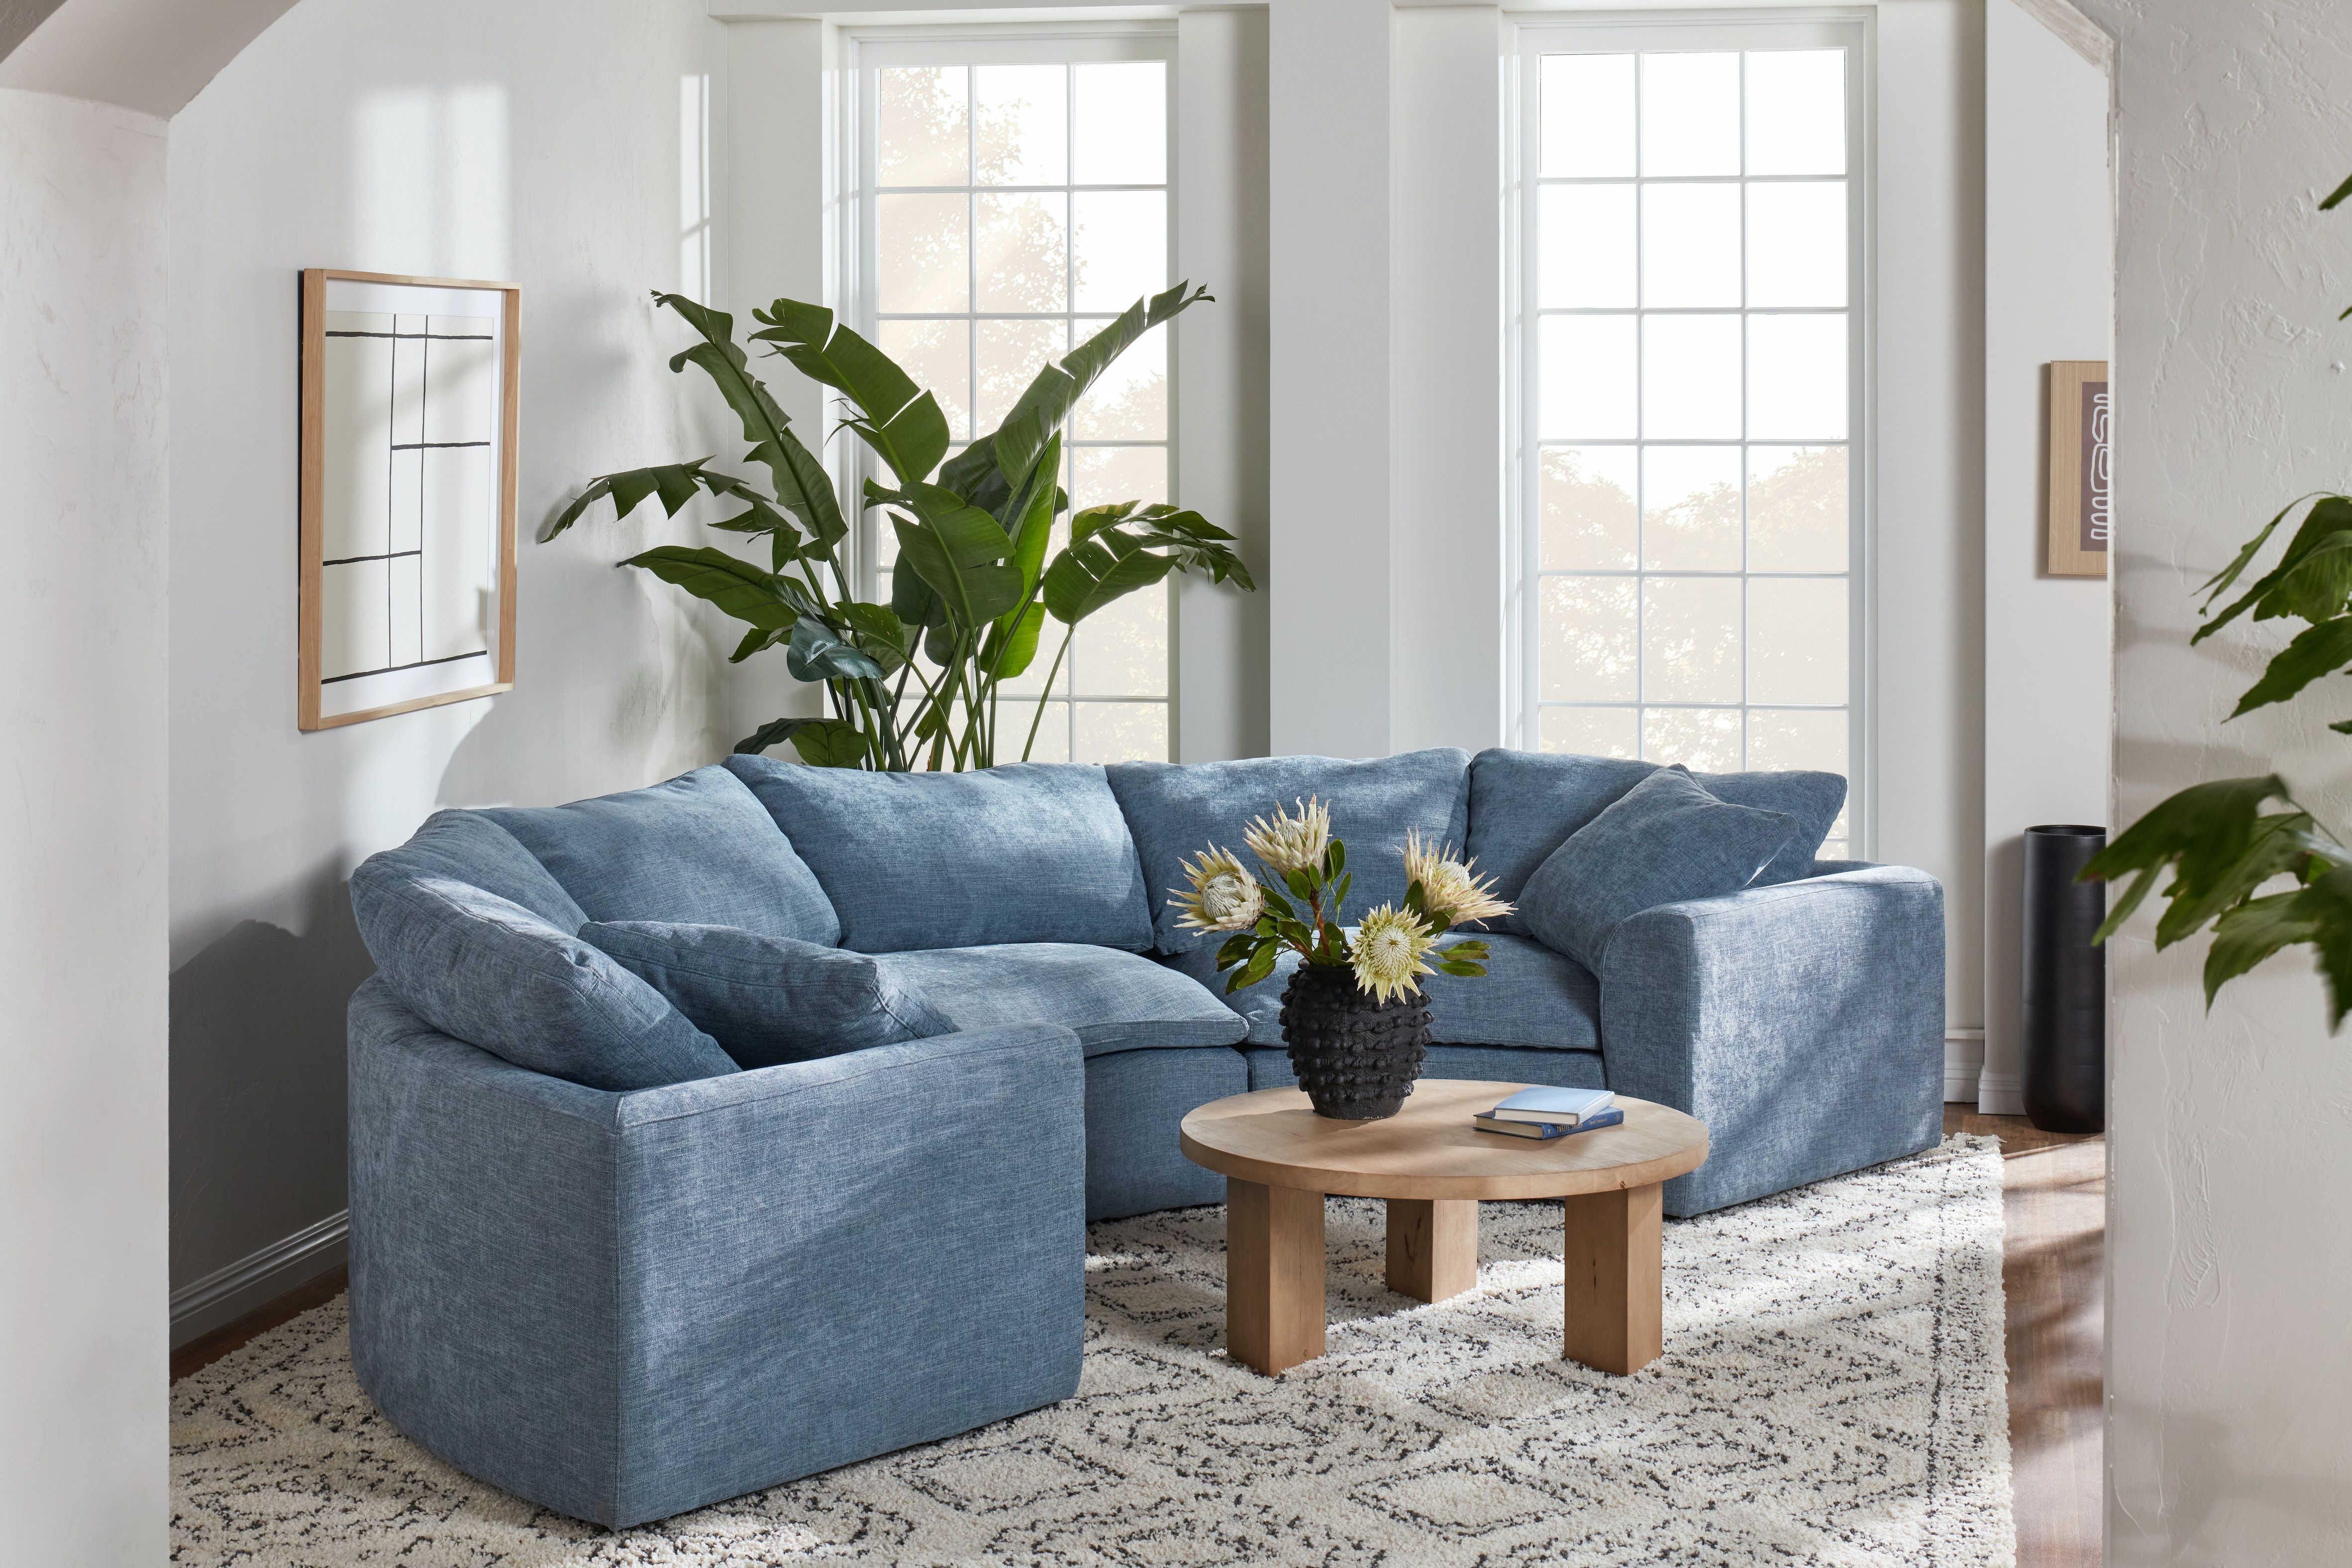 Bryant Semicircle Sectional (3 Piece) | Joybird Inside 3 Piece Curved Sectional Set (View 12 of 15)